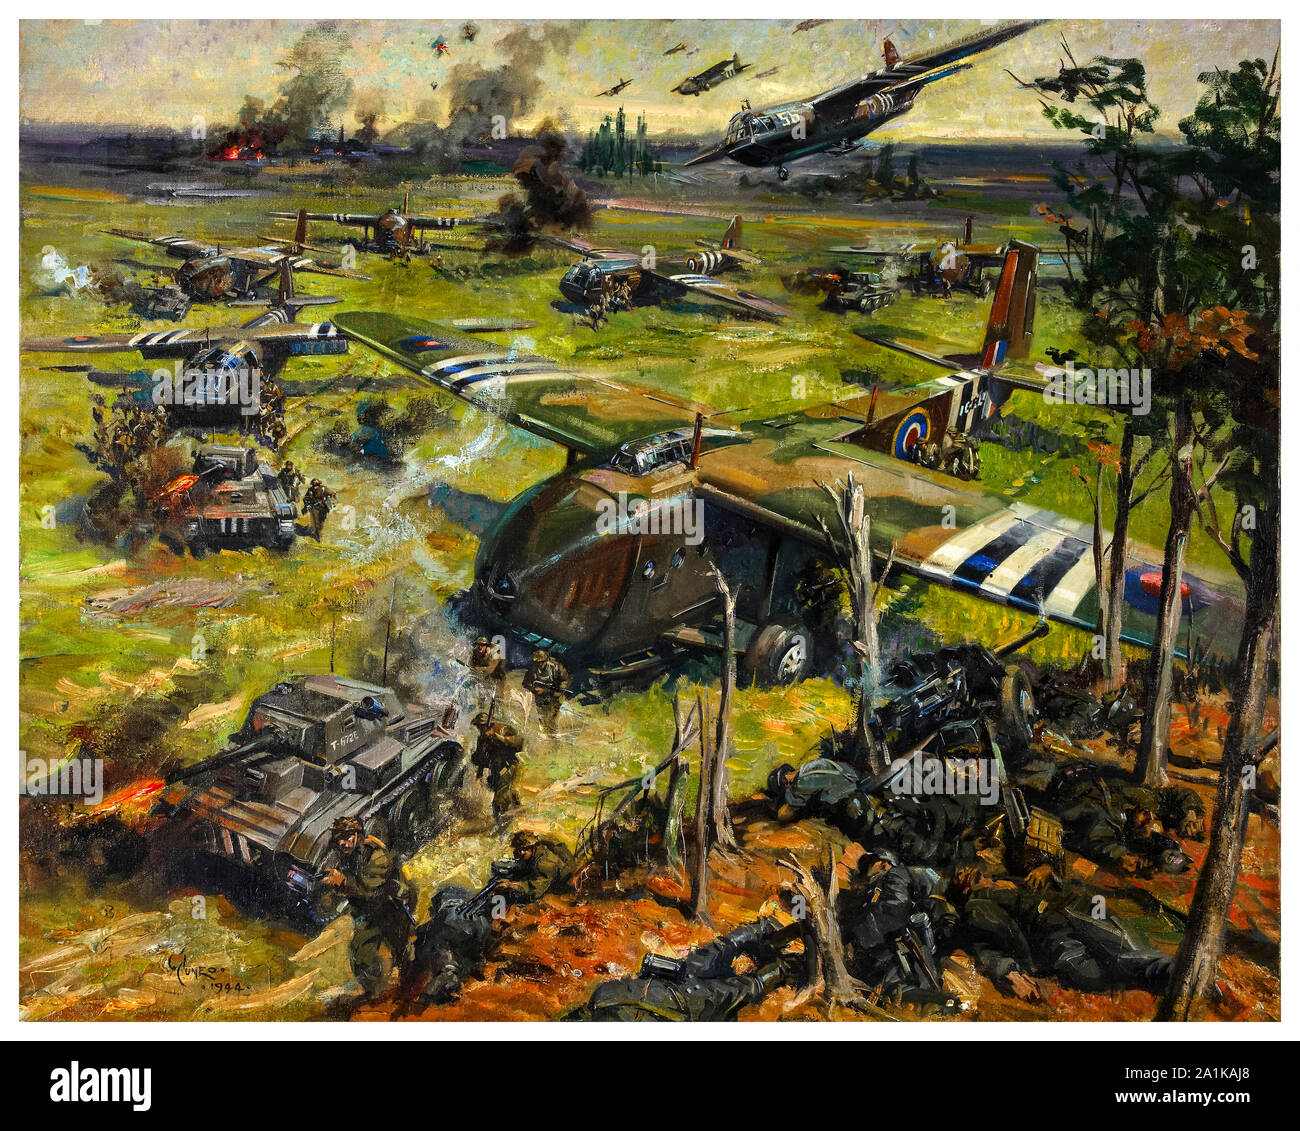 British, WW2, Artwork by Terence Cuneo, Invasion Scene, Troop carrying, Airspeed Horsa gliders, land in a field amidst a tank battle, painting, 1939-1946 Stock Photo